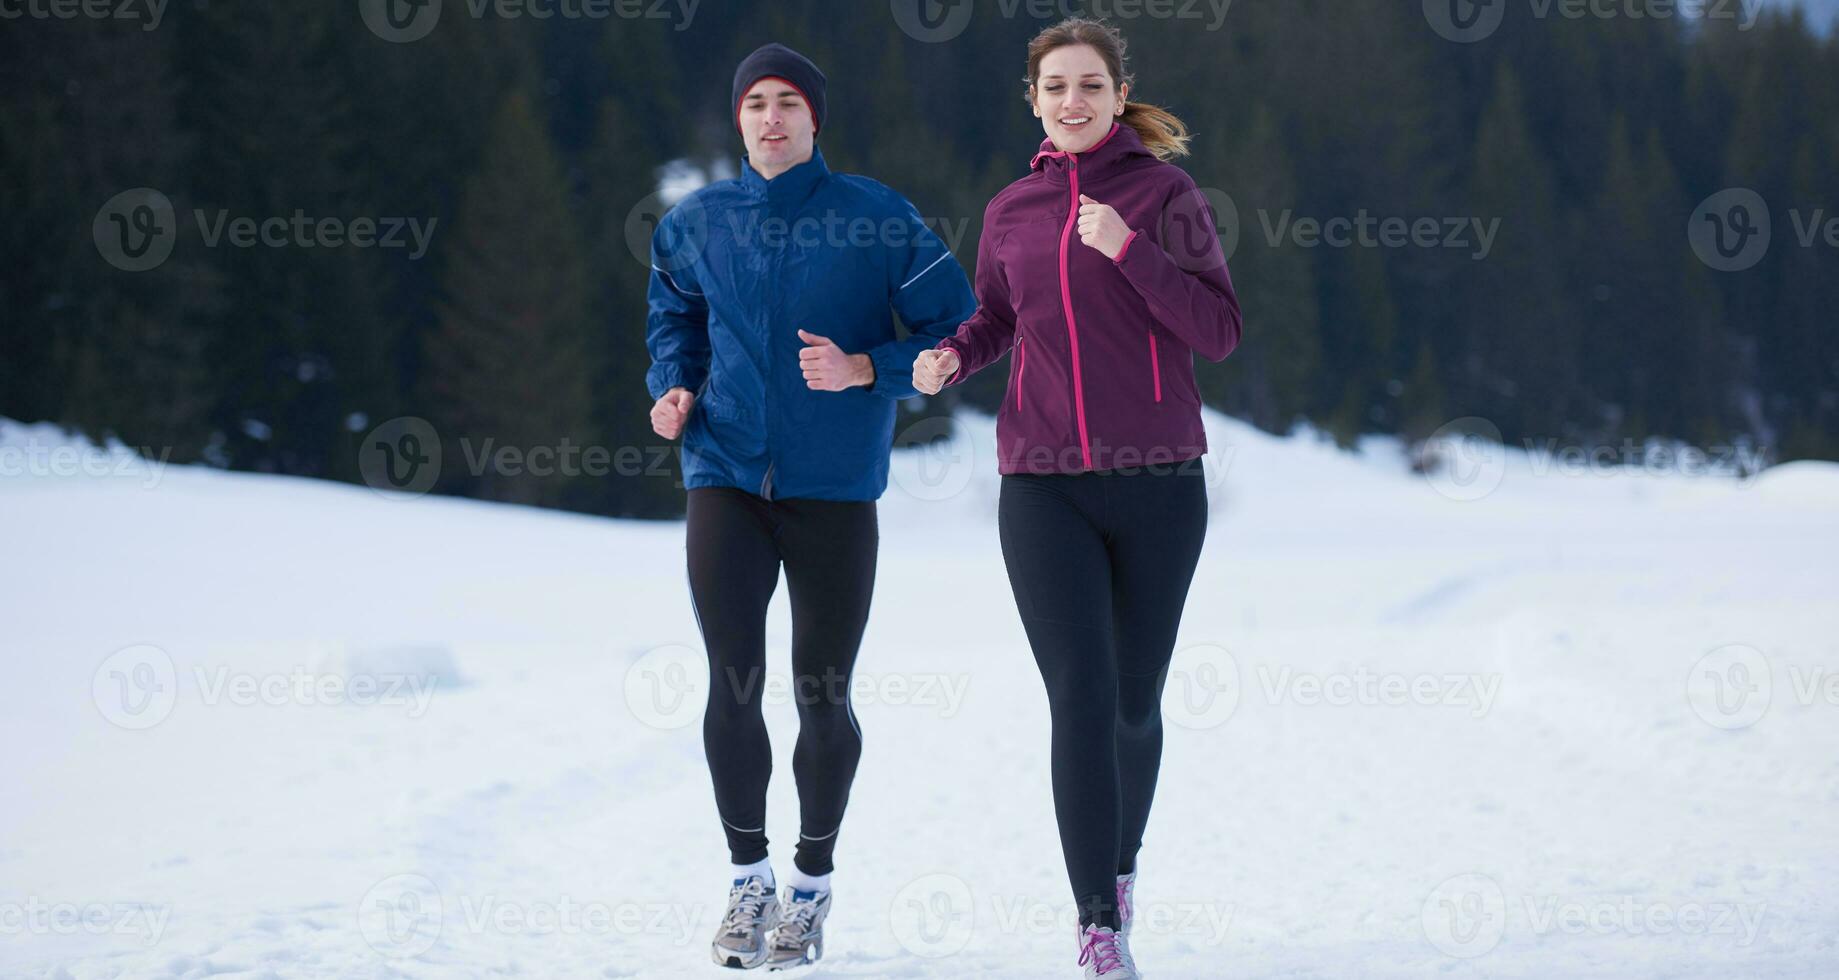 couple jogging outside on snow photo